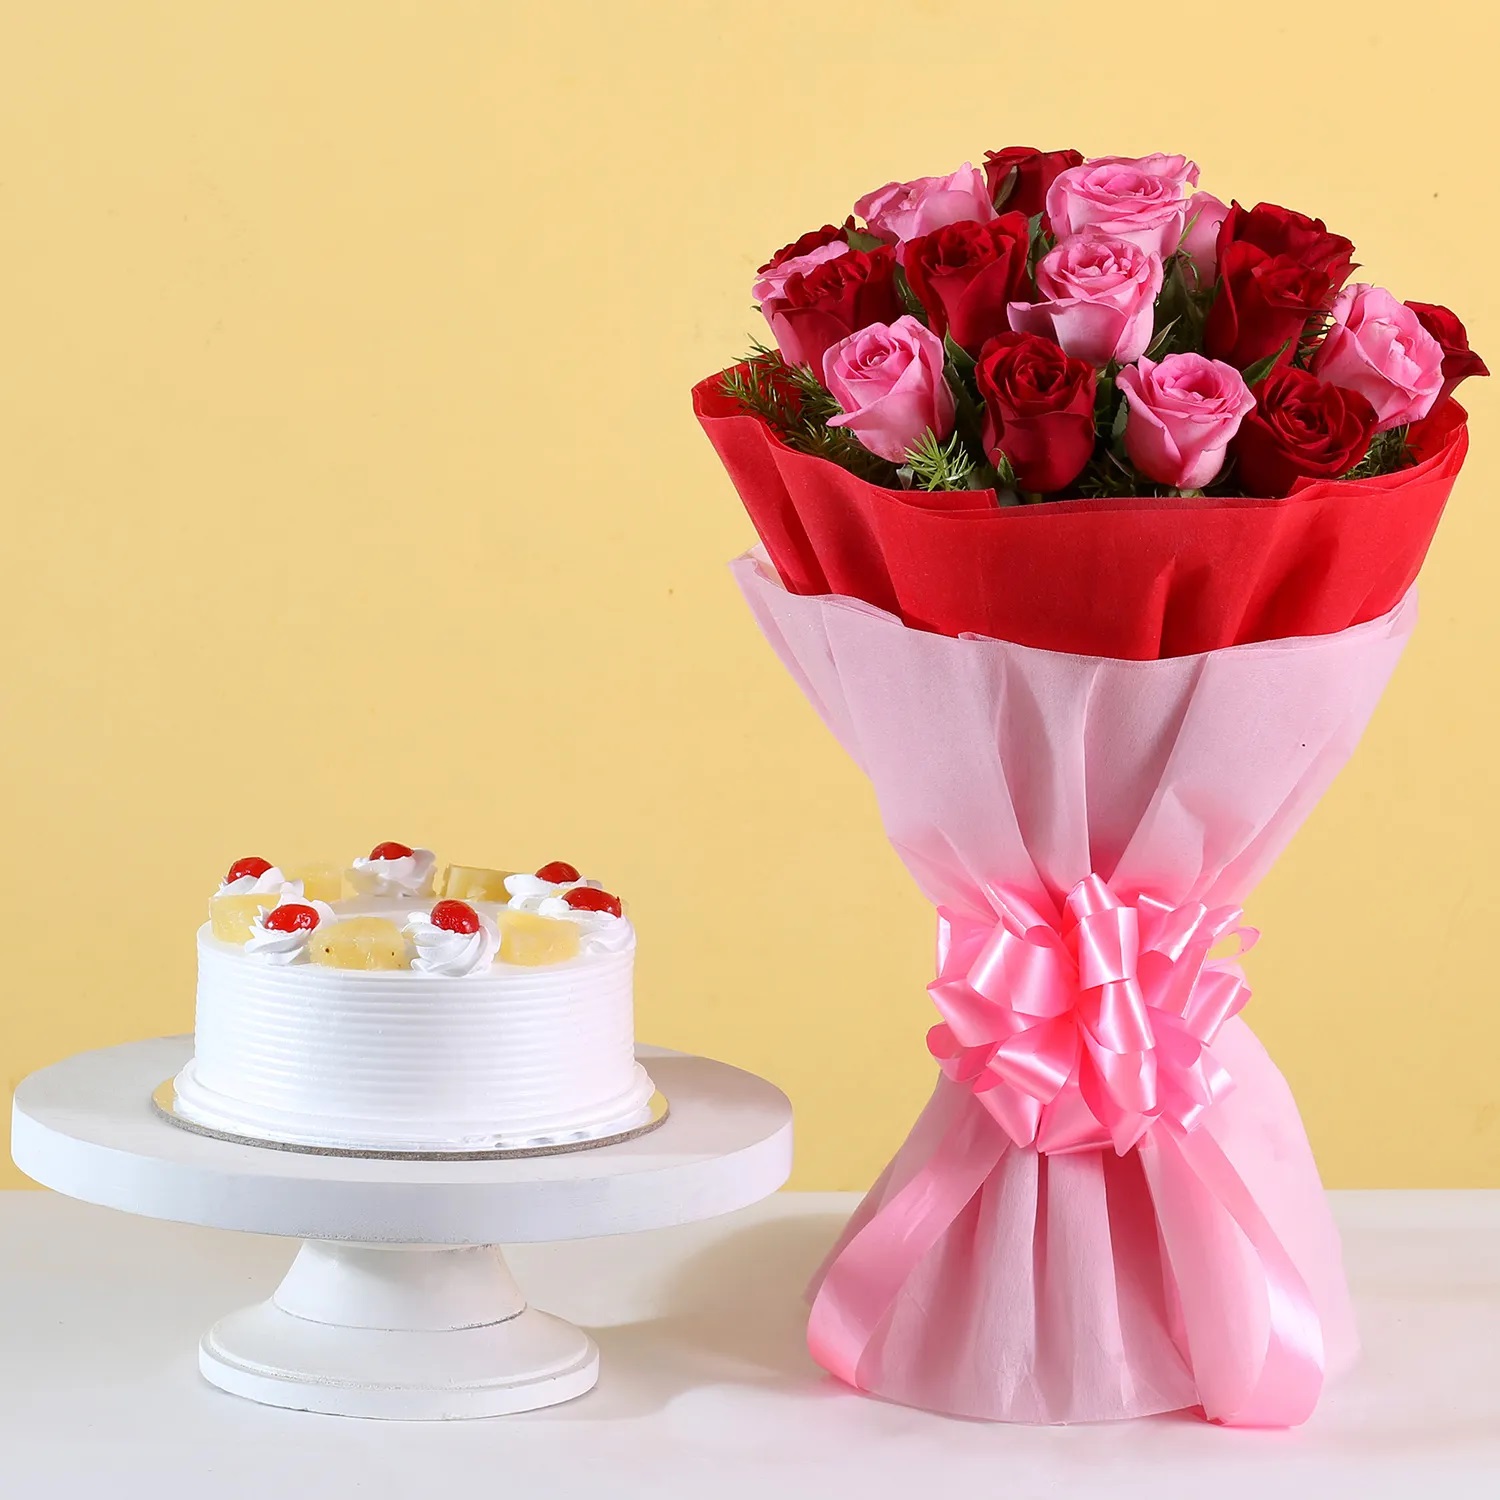 Online Flower & Cake Delivery in Chennai - Floraindia